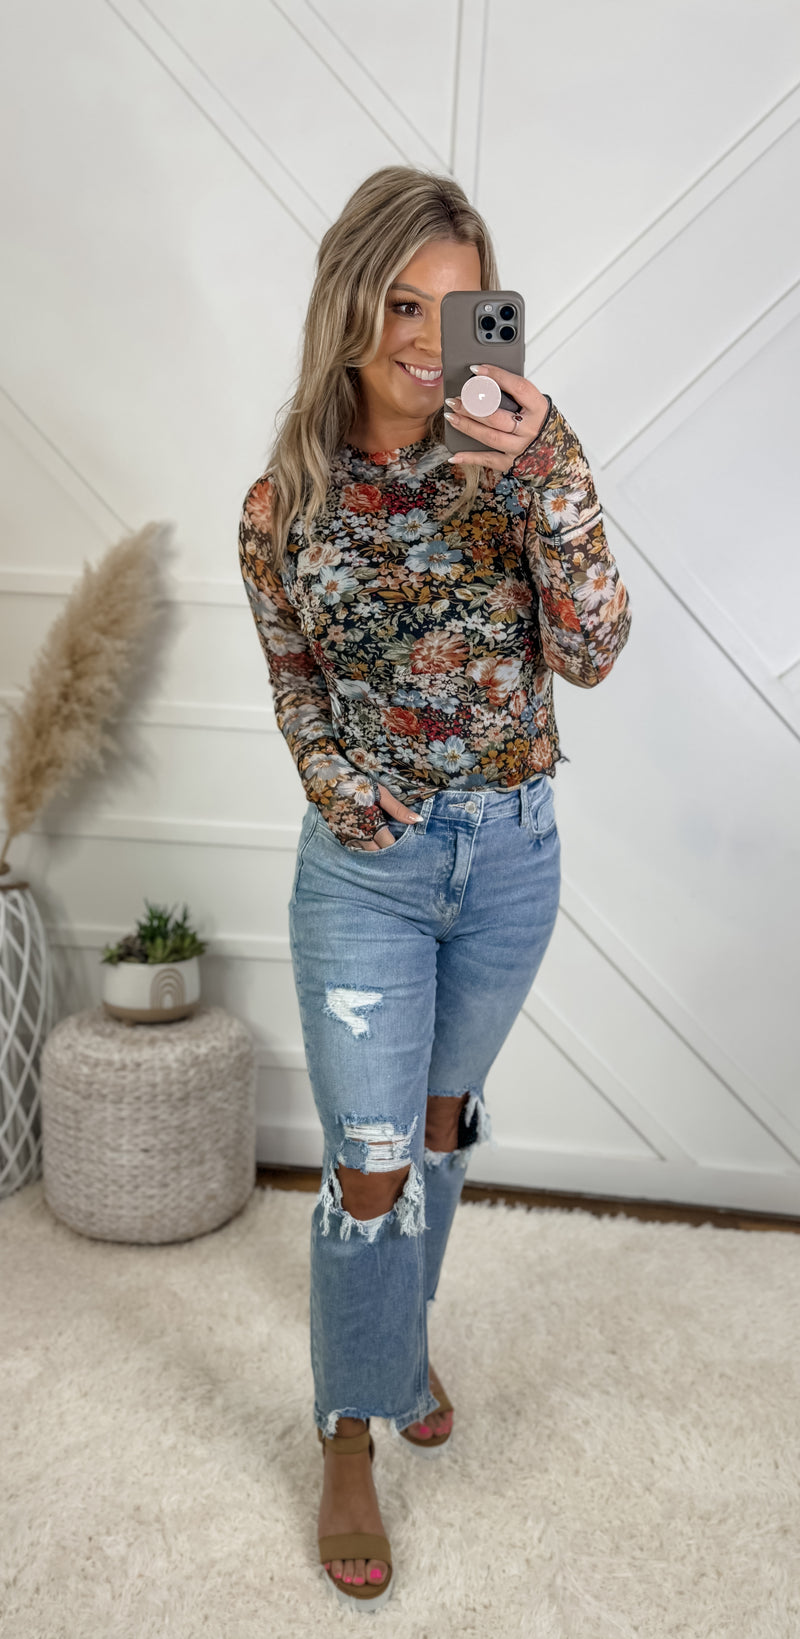 Follow Your Heart Floral Mesh Top